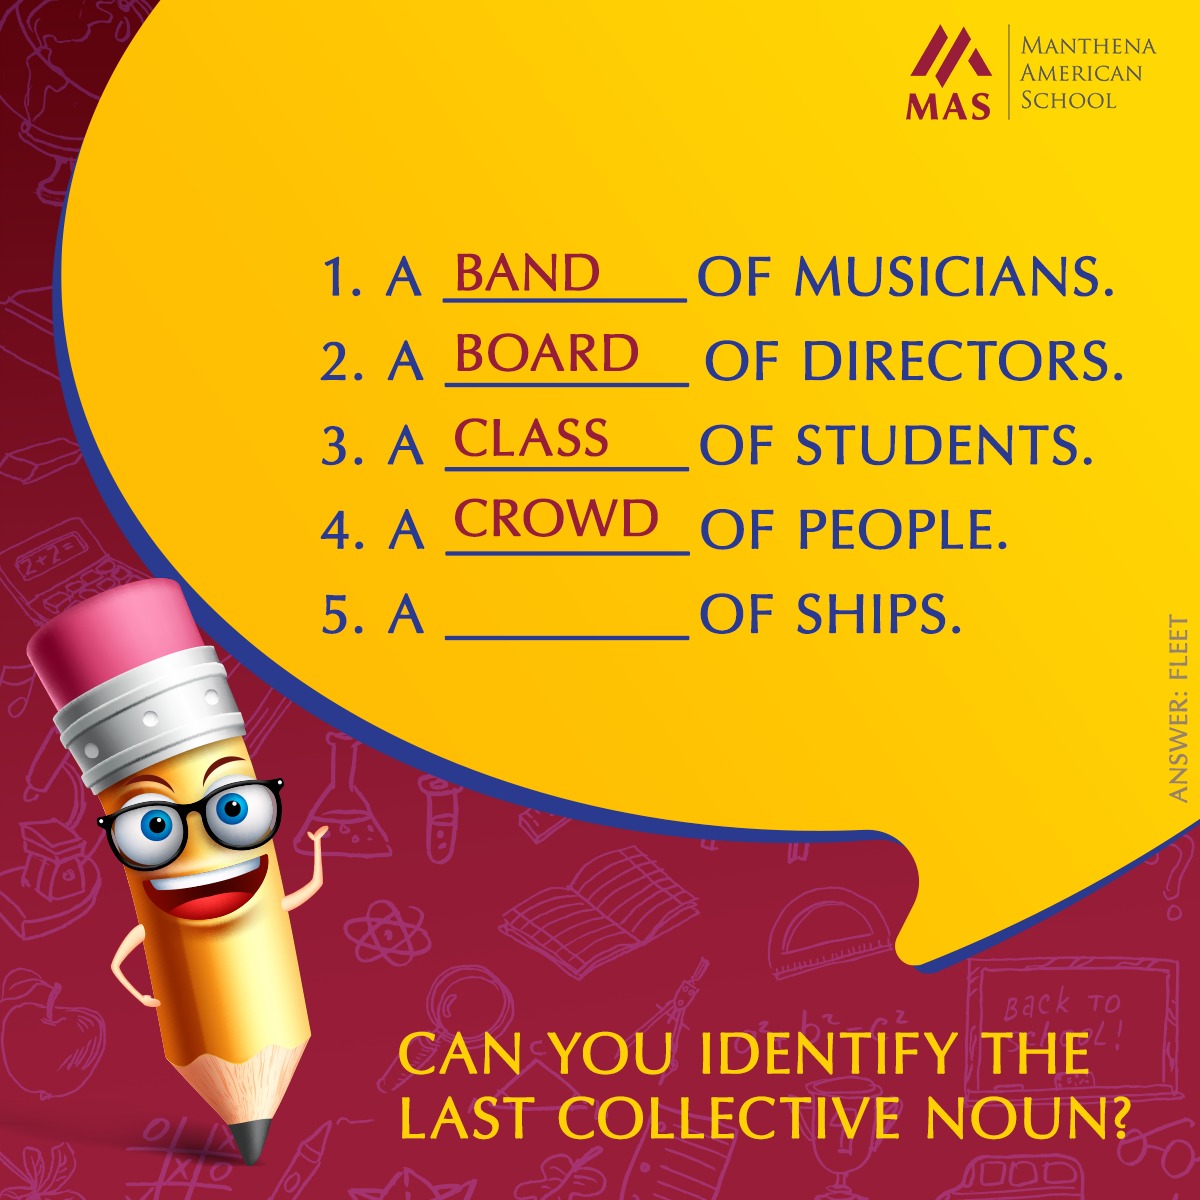 Check out these fun collective nouns and find the last one. Share your answer in the comments.
.
.
.
#collectivenouns #grammercollective #grammarchallenge #learningisfun #education  #sharjahschools #manthenaamericanschool